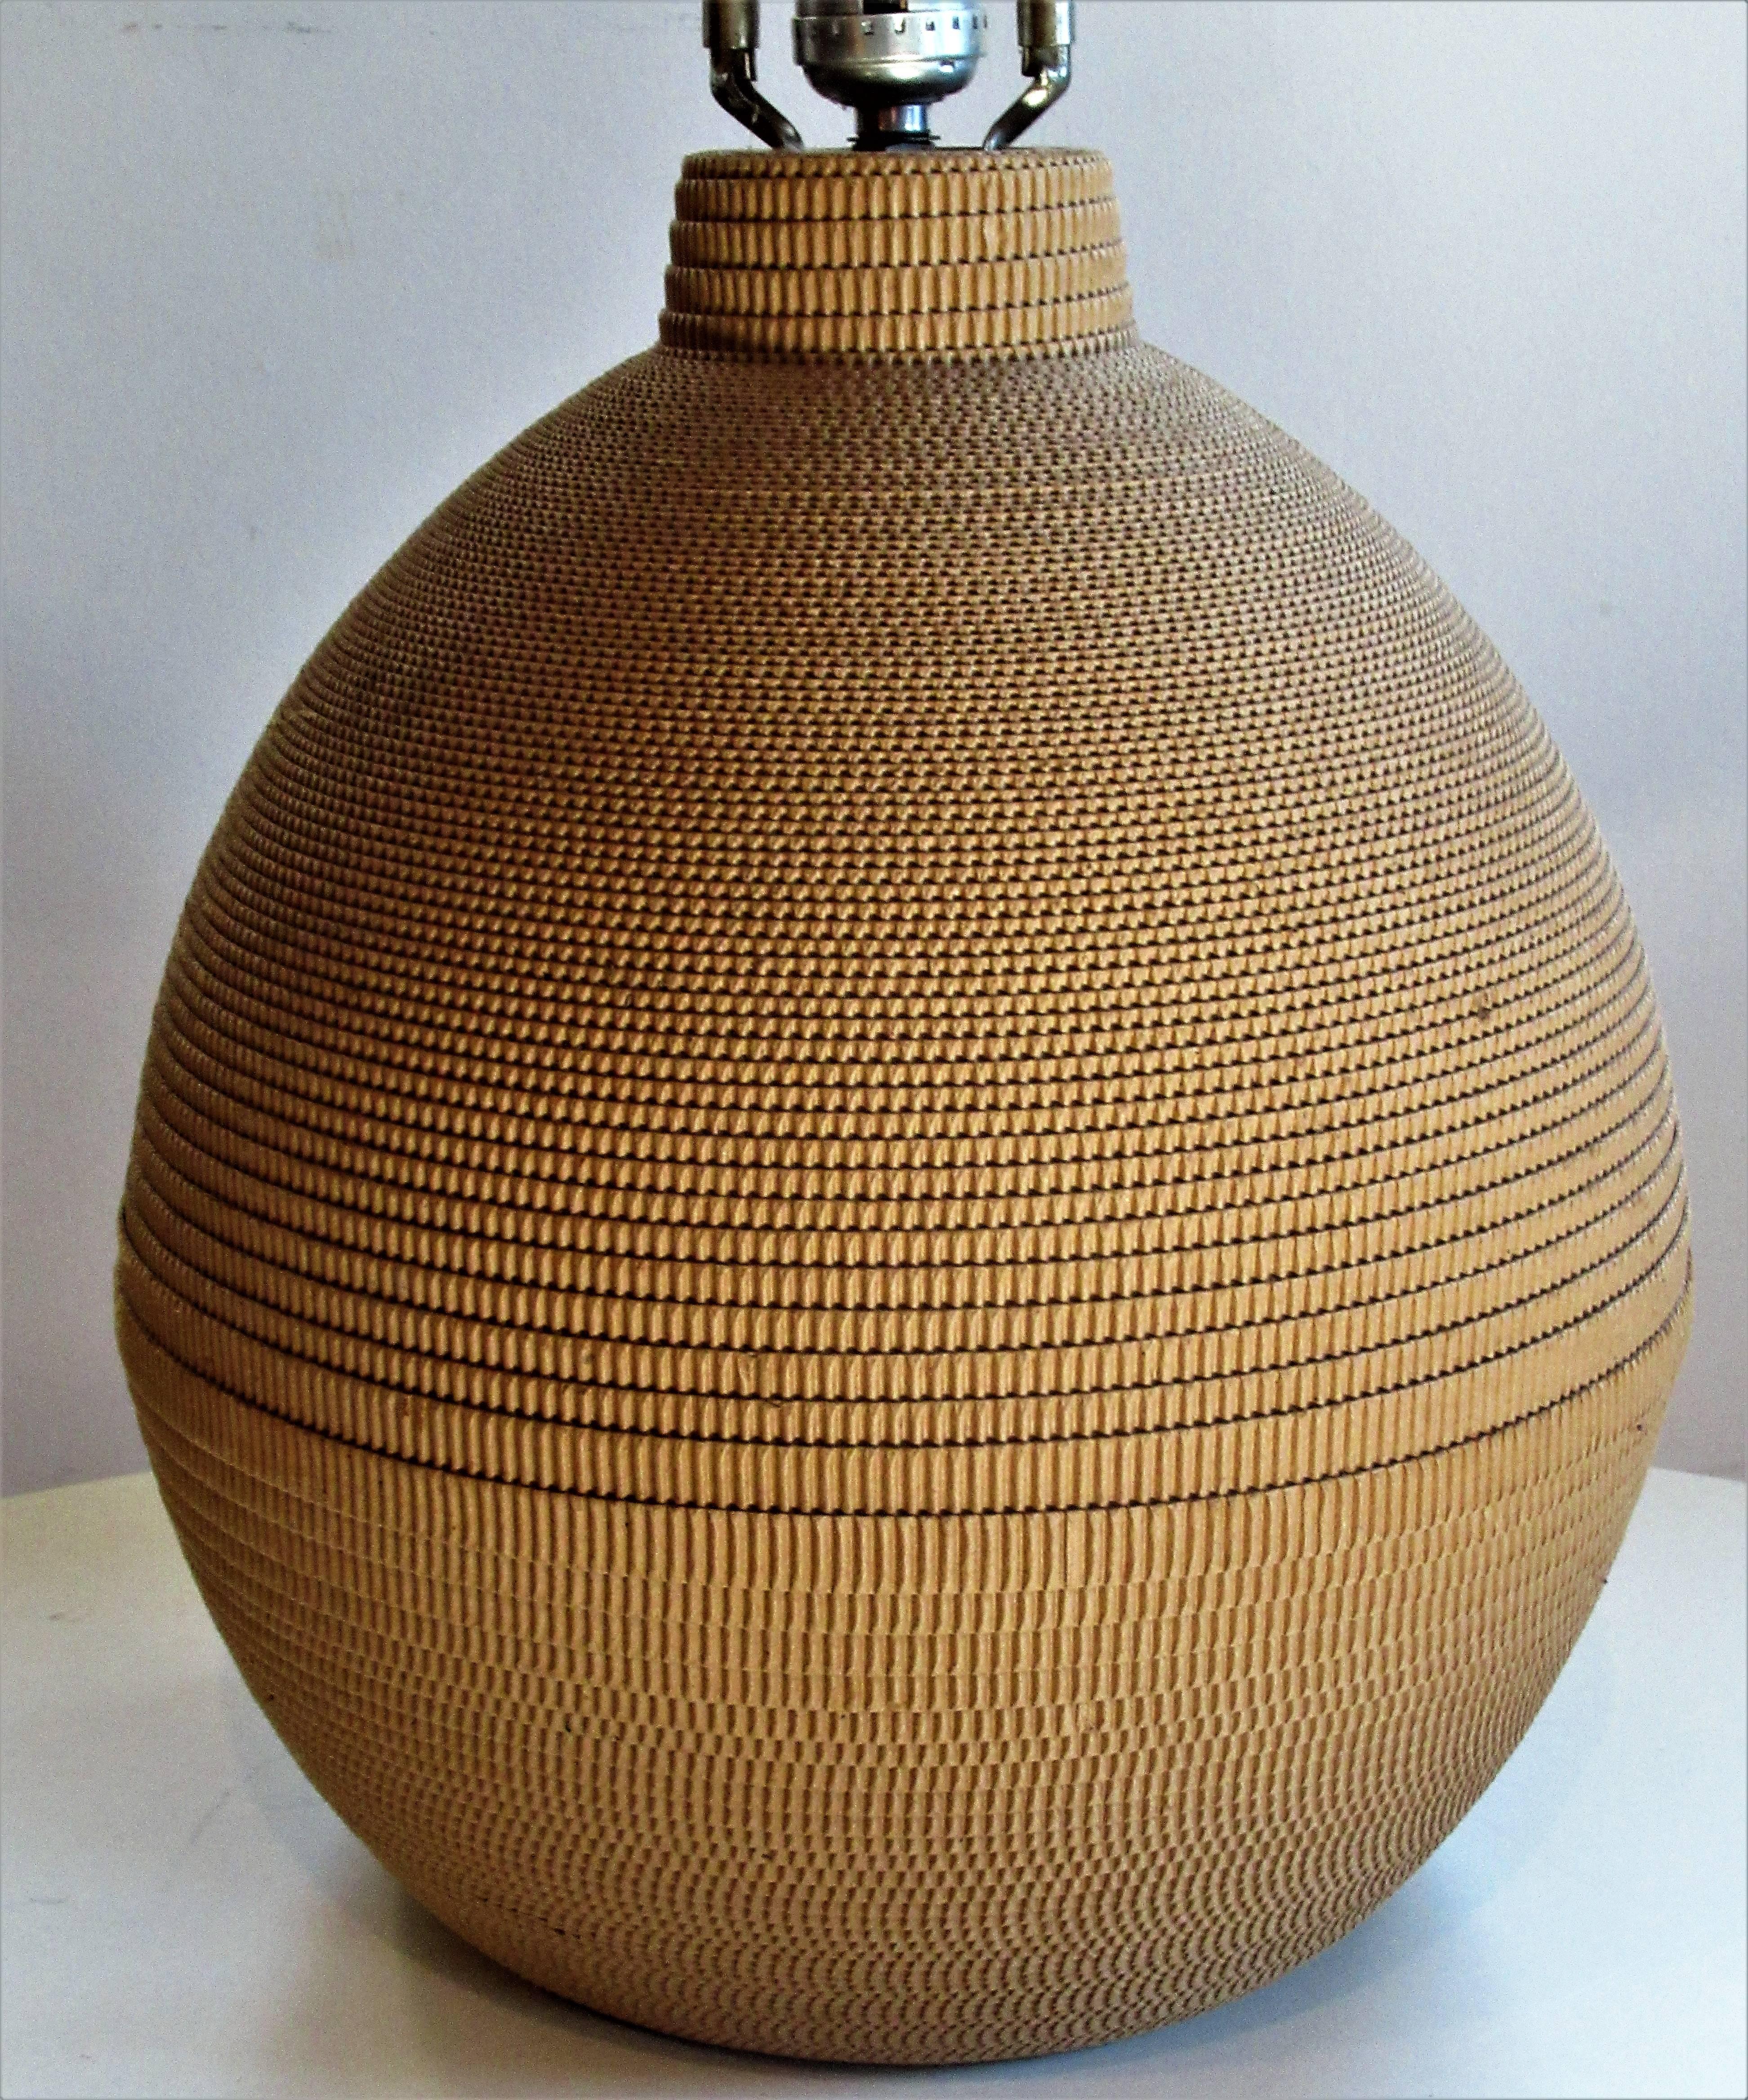 Dating from the 1970s a great looking corrugated cut spiral paper bulbous form table lamp in the style of Frank Gehry.